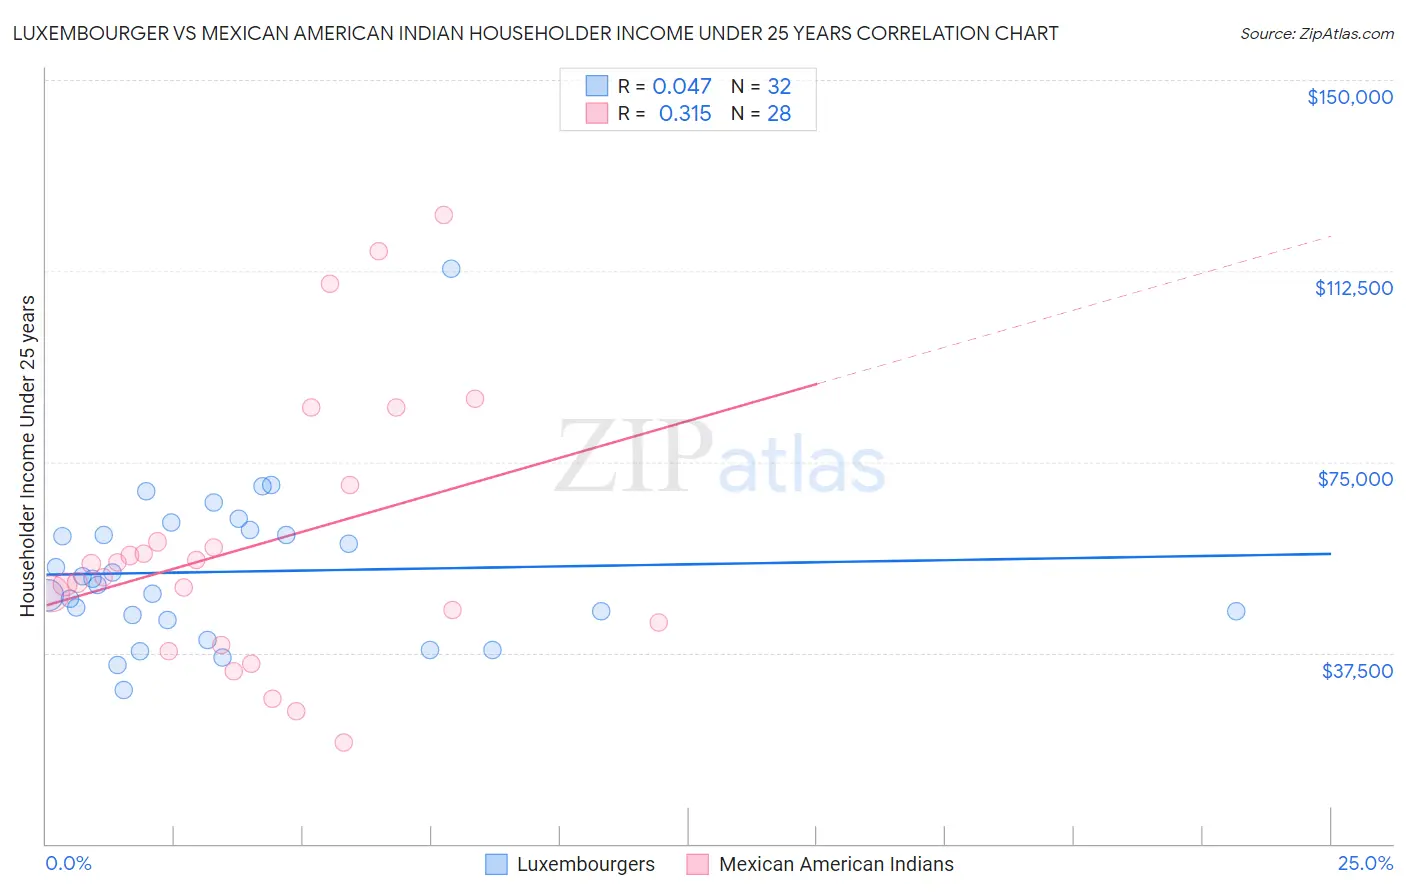 Luxembourger vs Mexican American Indian Householder Income Under 25 years